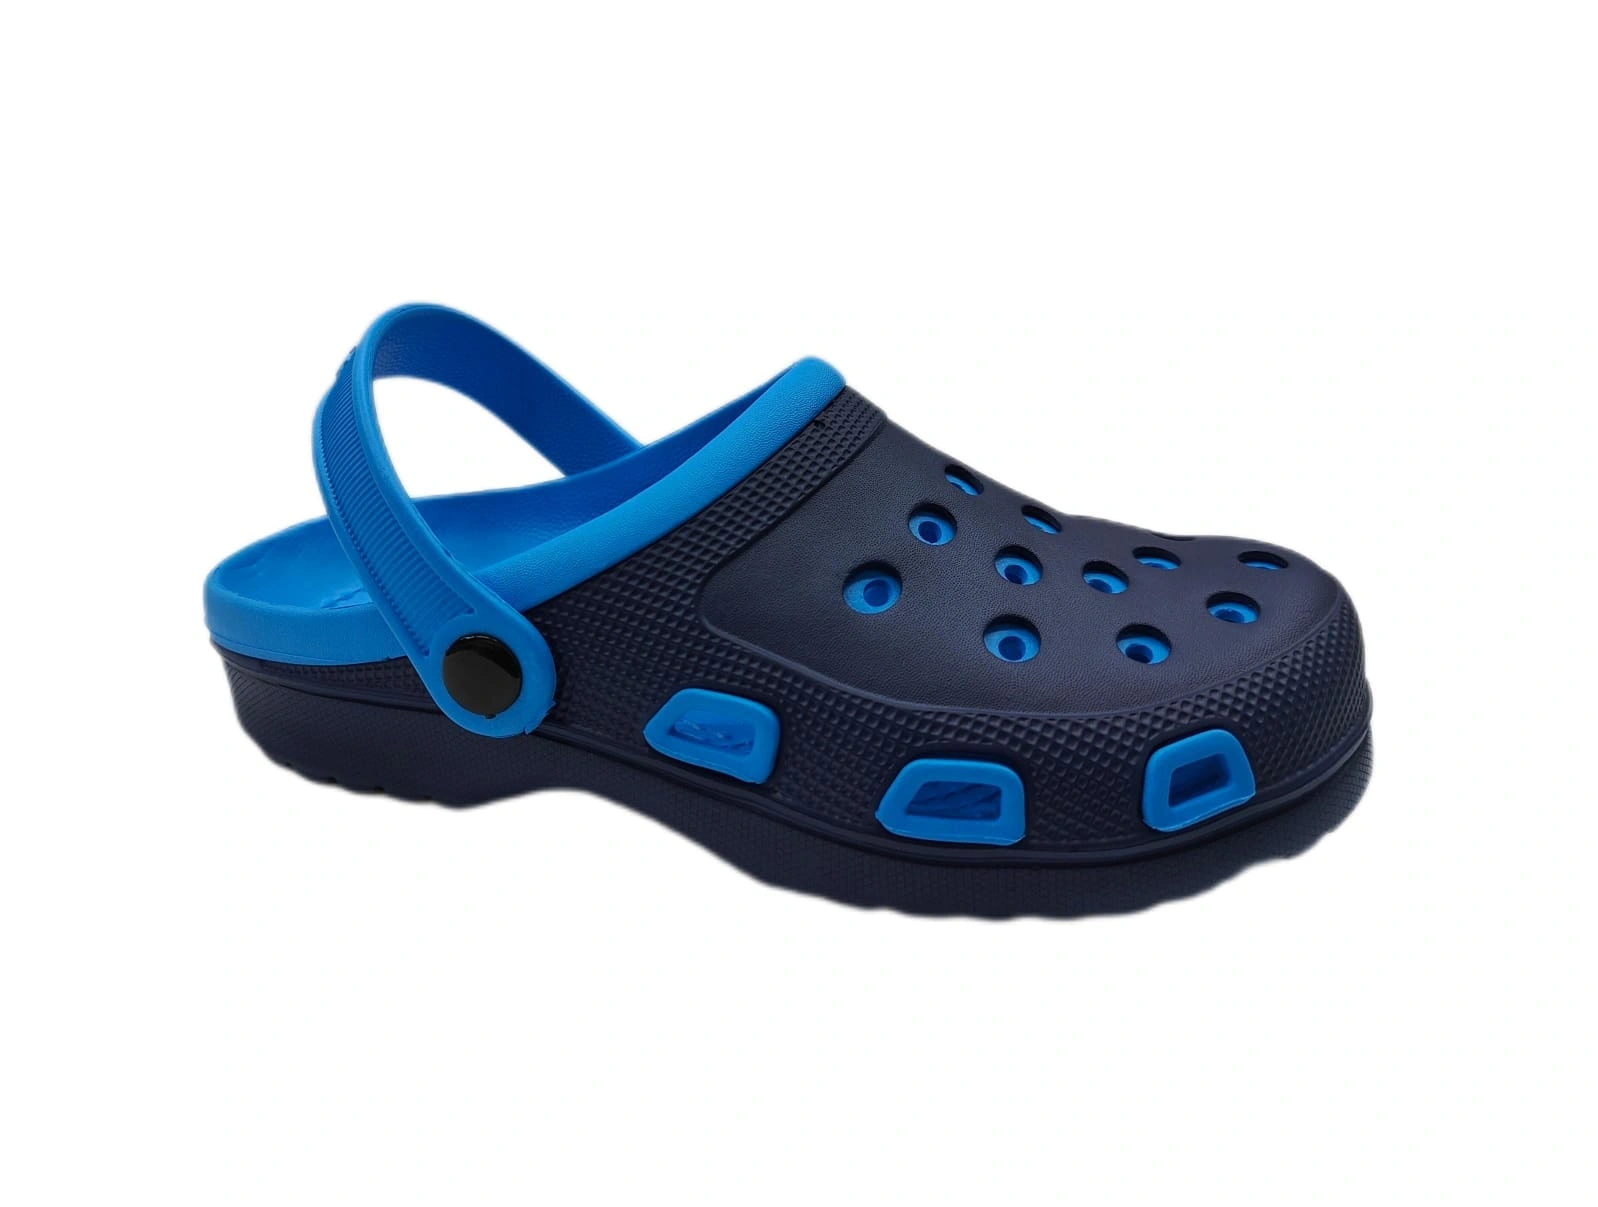 Clog Sandals for Men and Women: Comfortable, Lightweight Design with Durable Upper and Slip-Resistant Outsole for All-Day Wear-Blue-UK 7-3